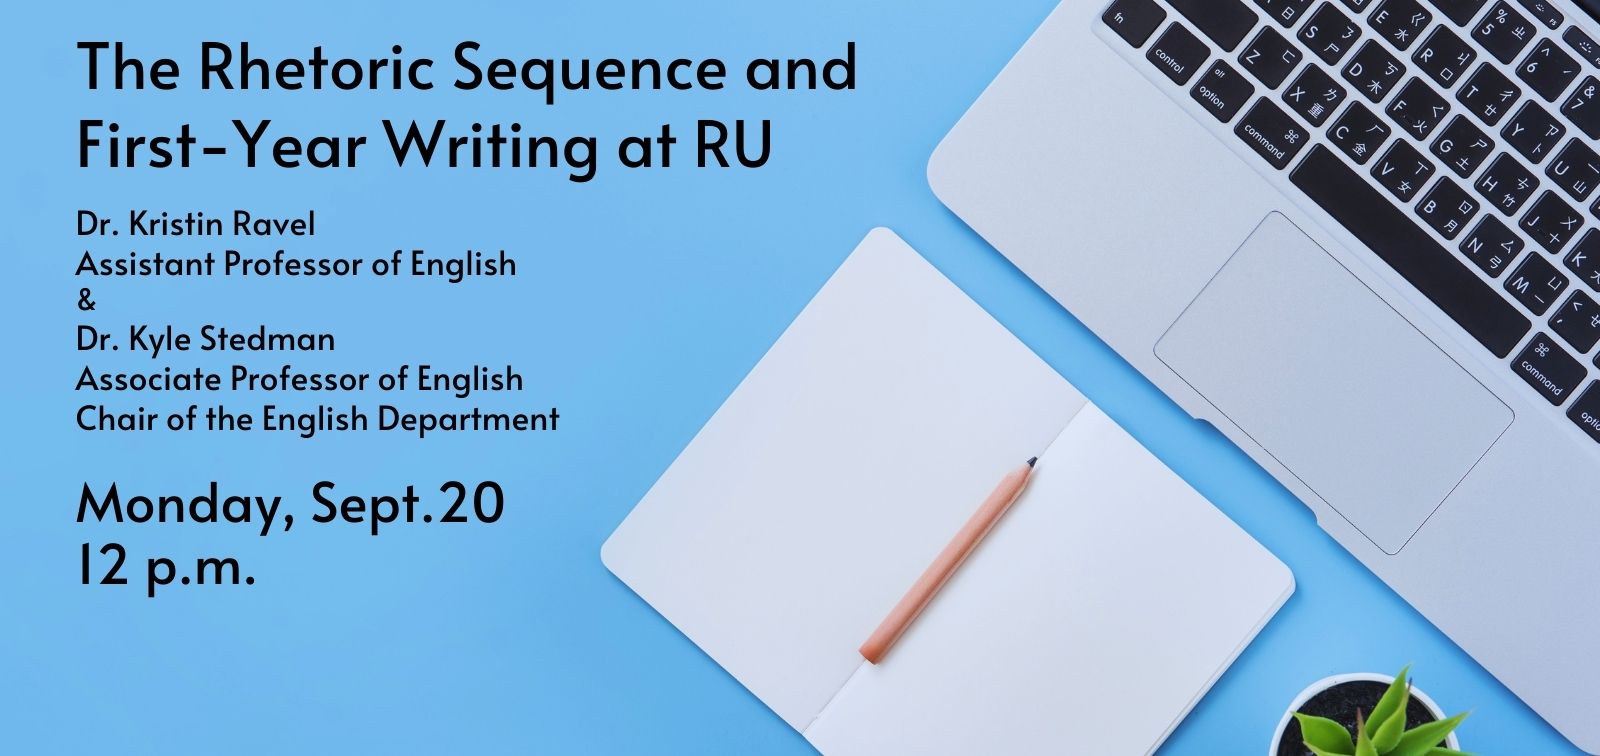 Image for Fall 2021 Brown Bag Presentation, The Rhetoric Sequence and First-Year Writing at RU webinar